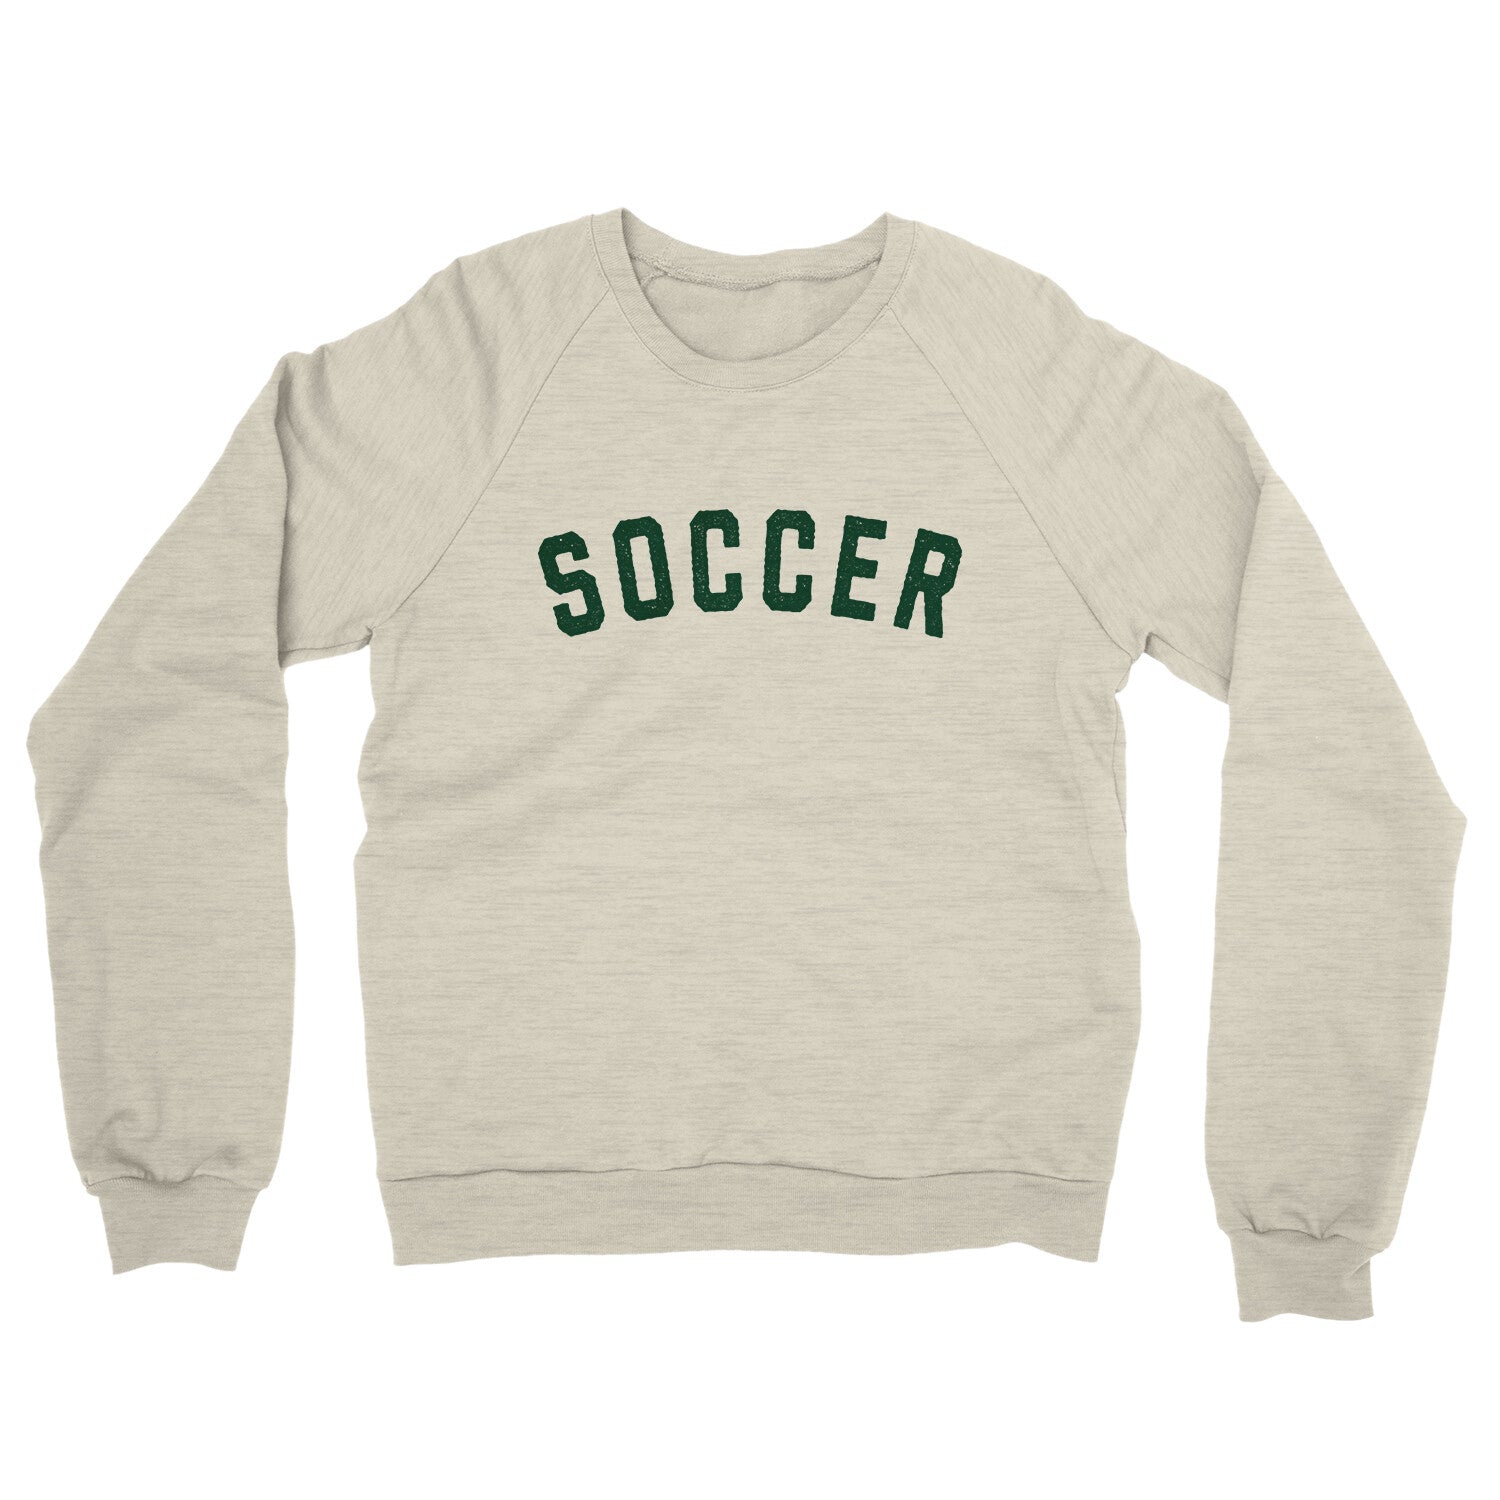 Soccer in Heather Oatmeal Color